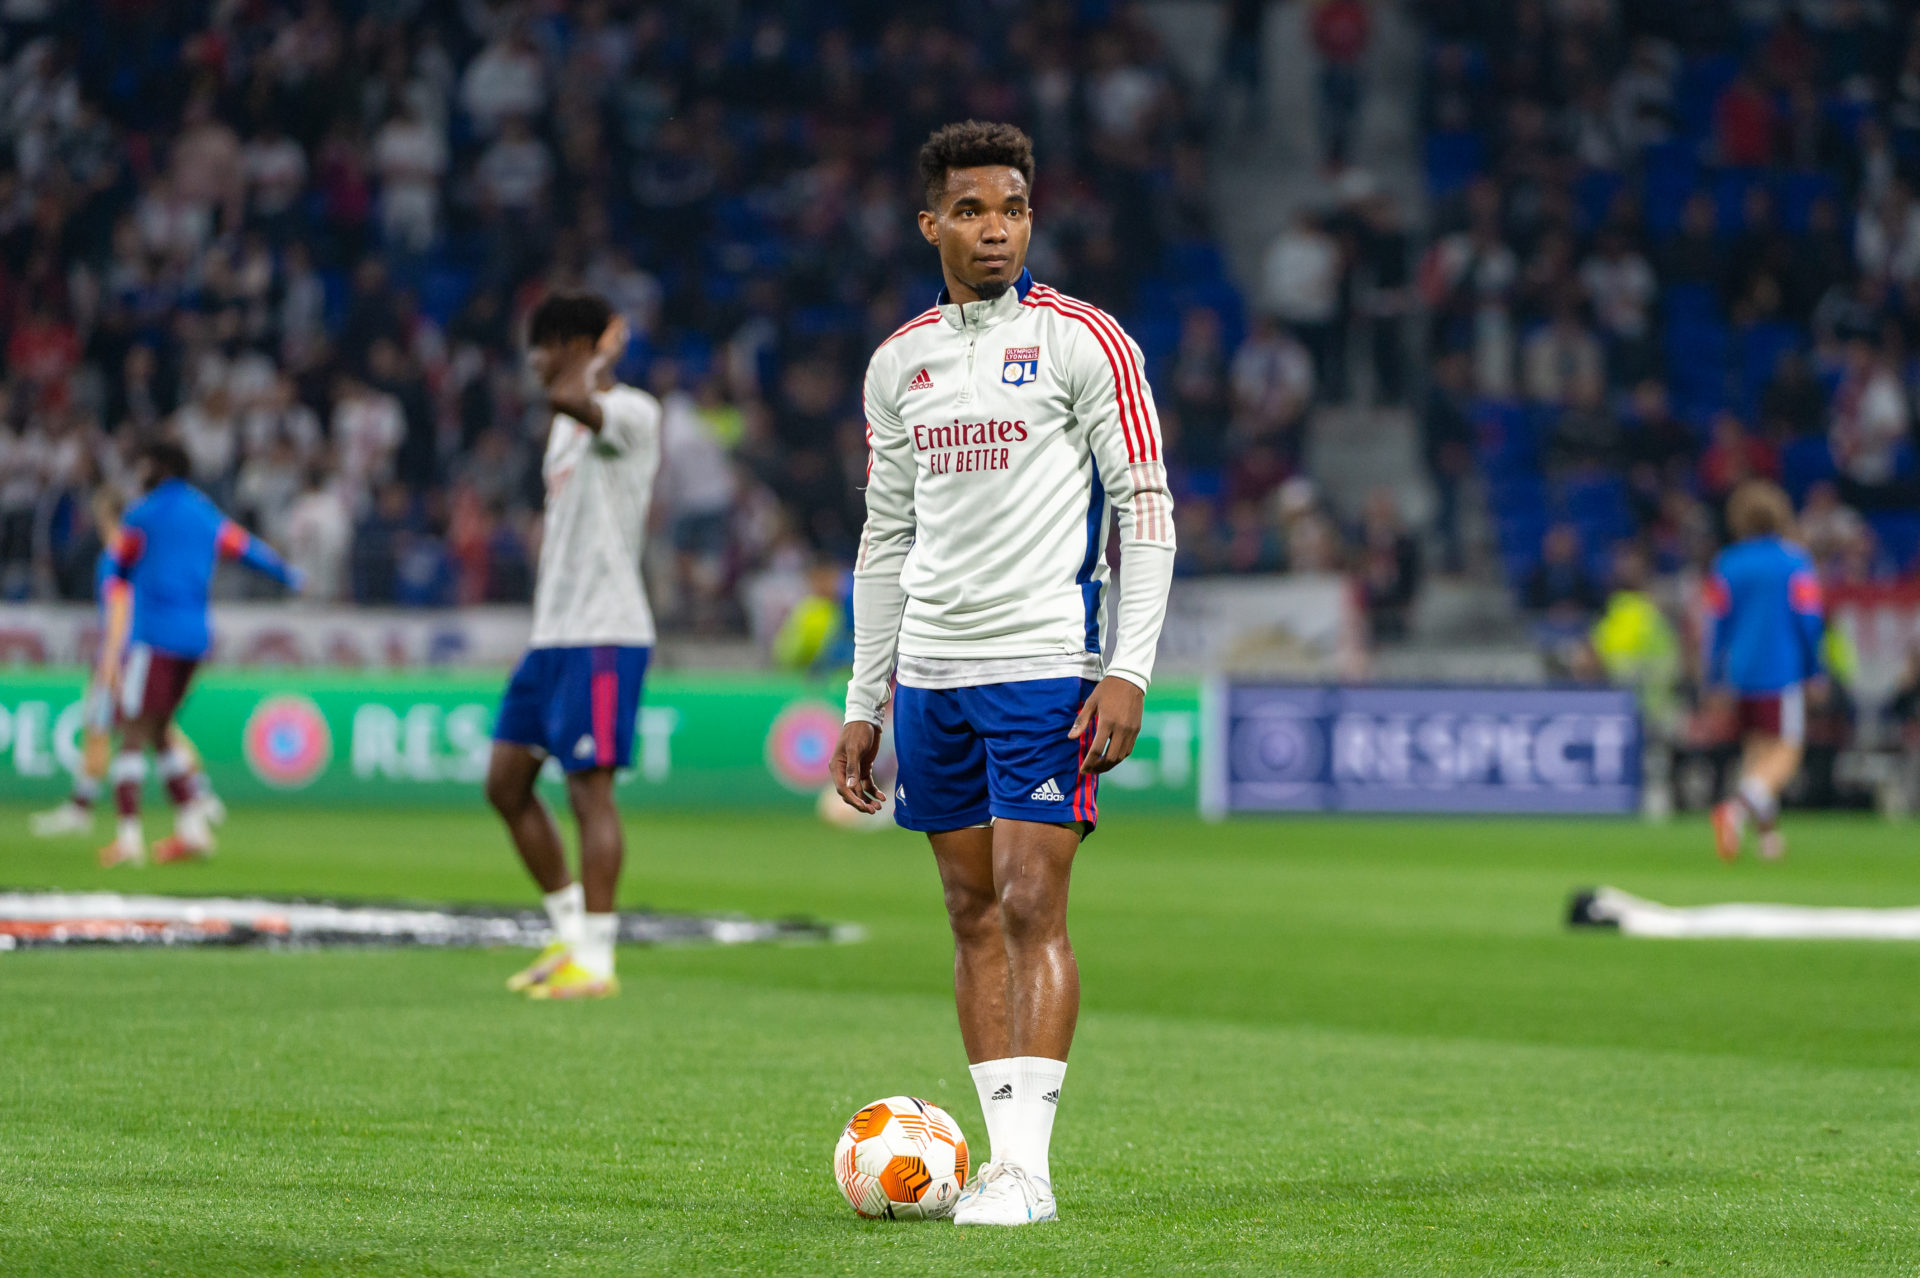 West Ham are reportedly eyeing a move to sign Thiago Mendes from Lyon in the summer